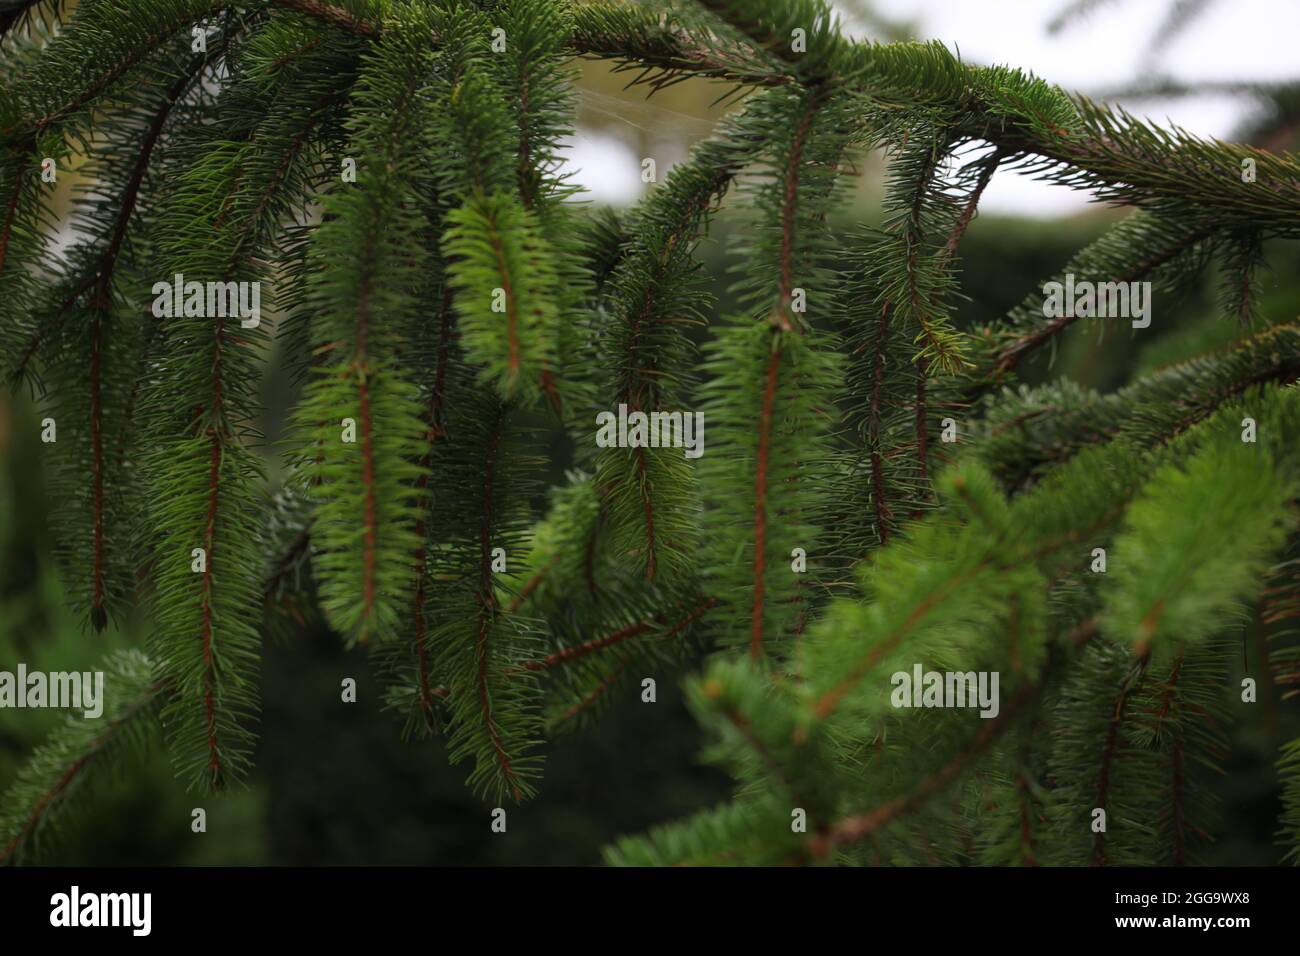 Abstract European or Norway Spruce branchlets / Picea abies Stock Photo